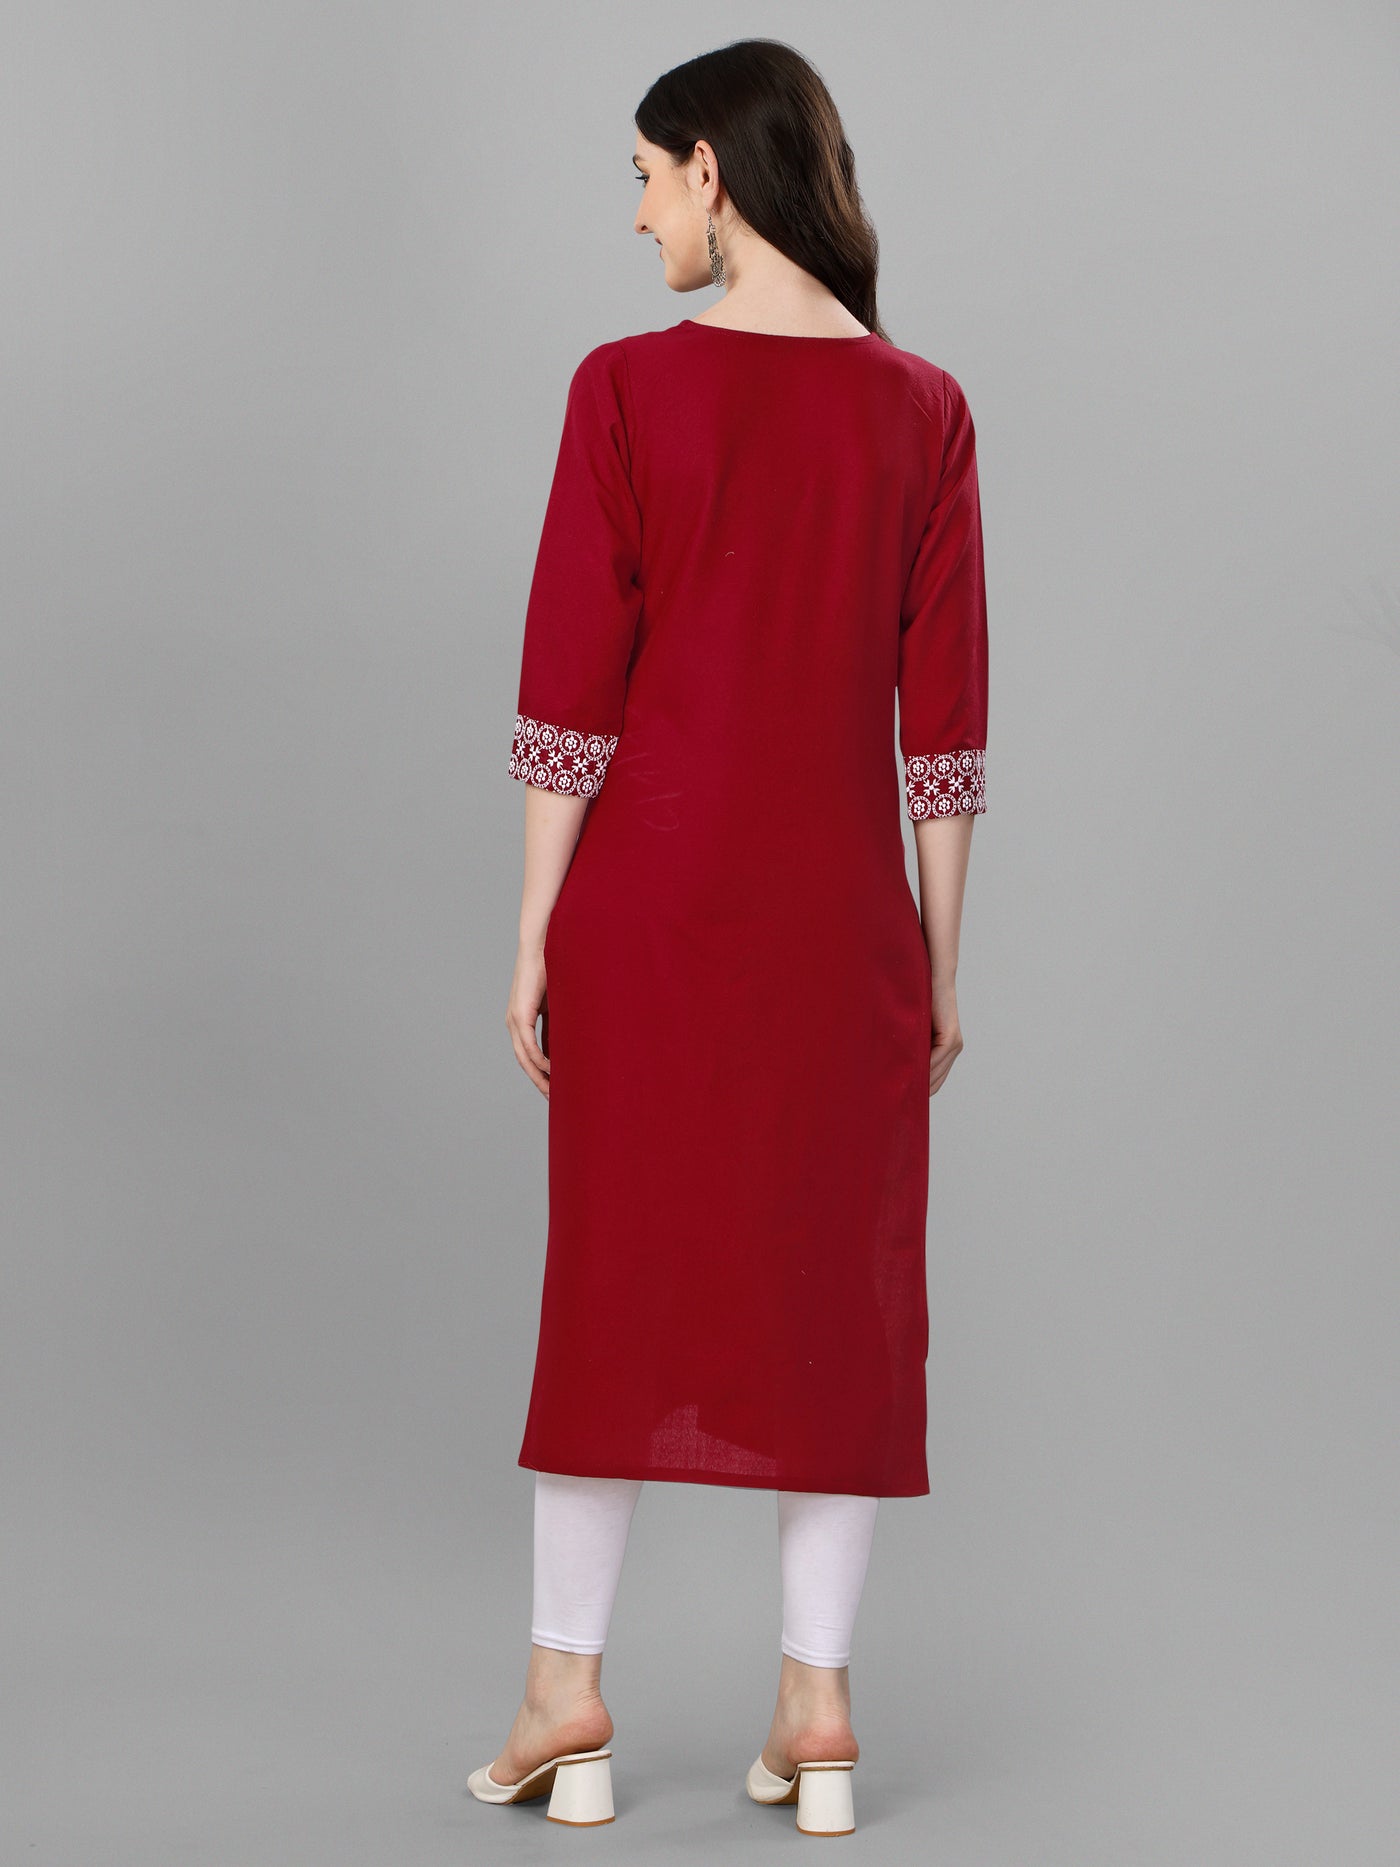 Devi-3 Straight cut Cotton Red Kurti With Beautiful Embroidery Work VK1